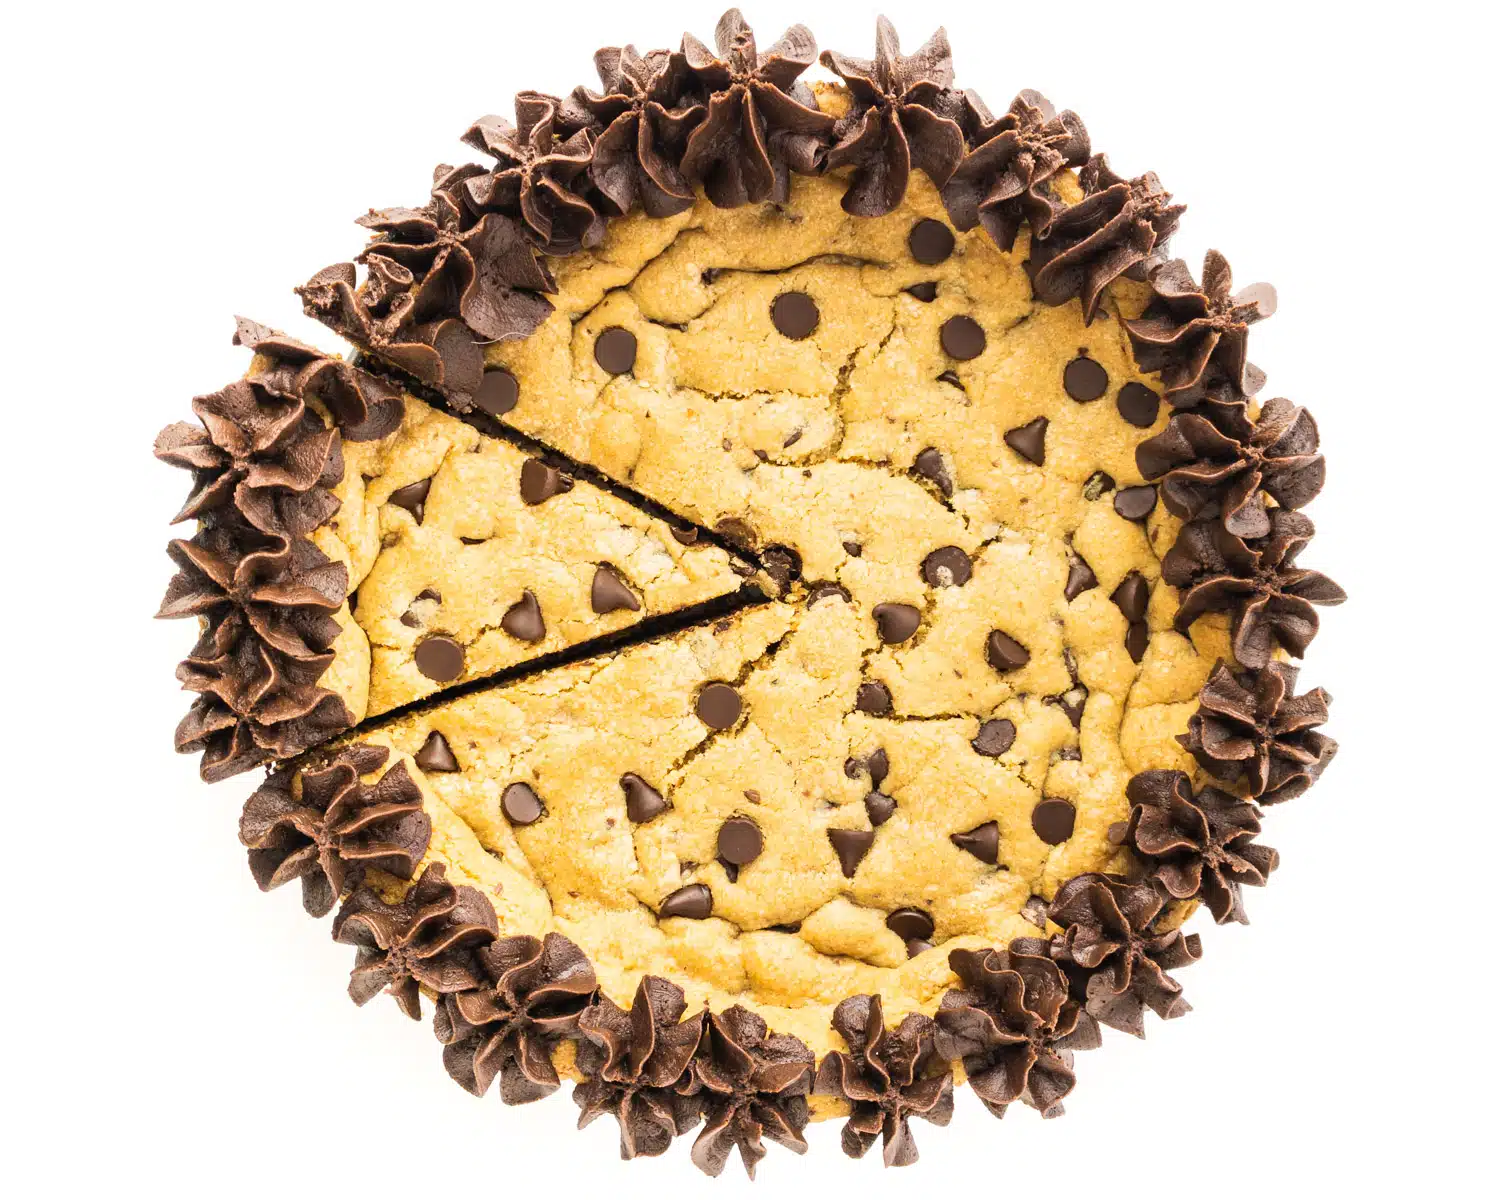 Looking down on a chocolate chip cookie cake with a slice cut out.